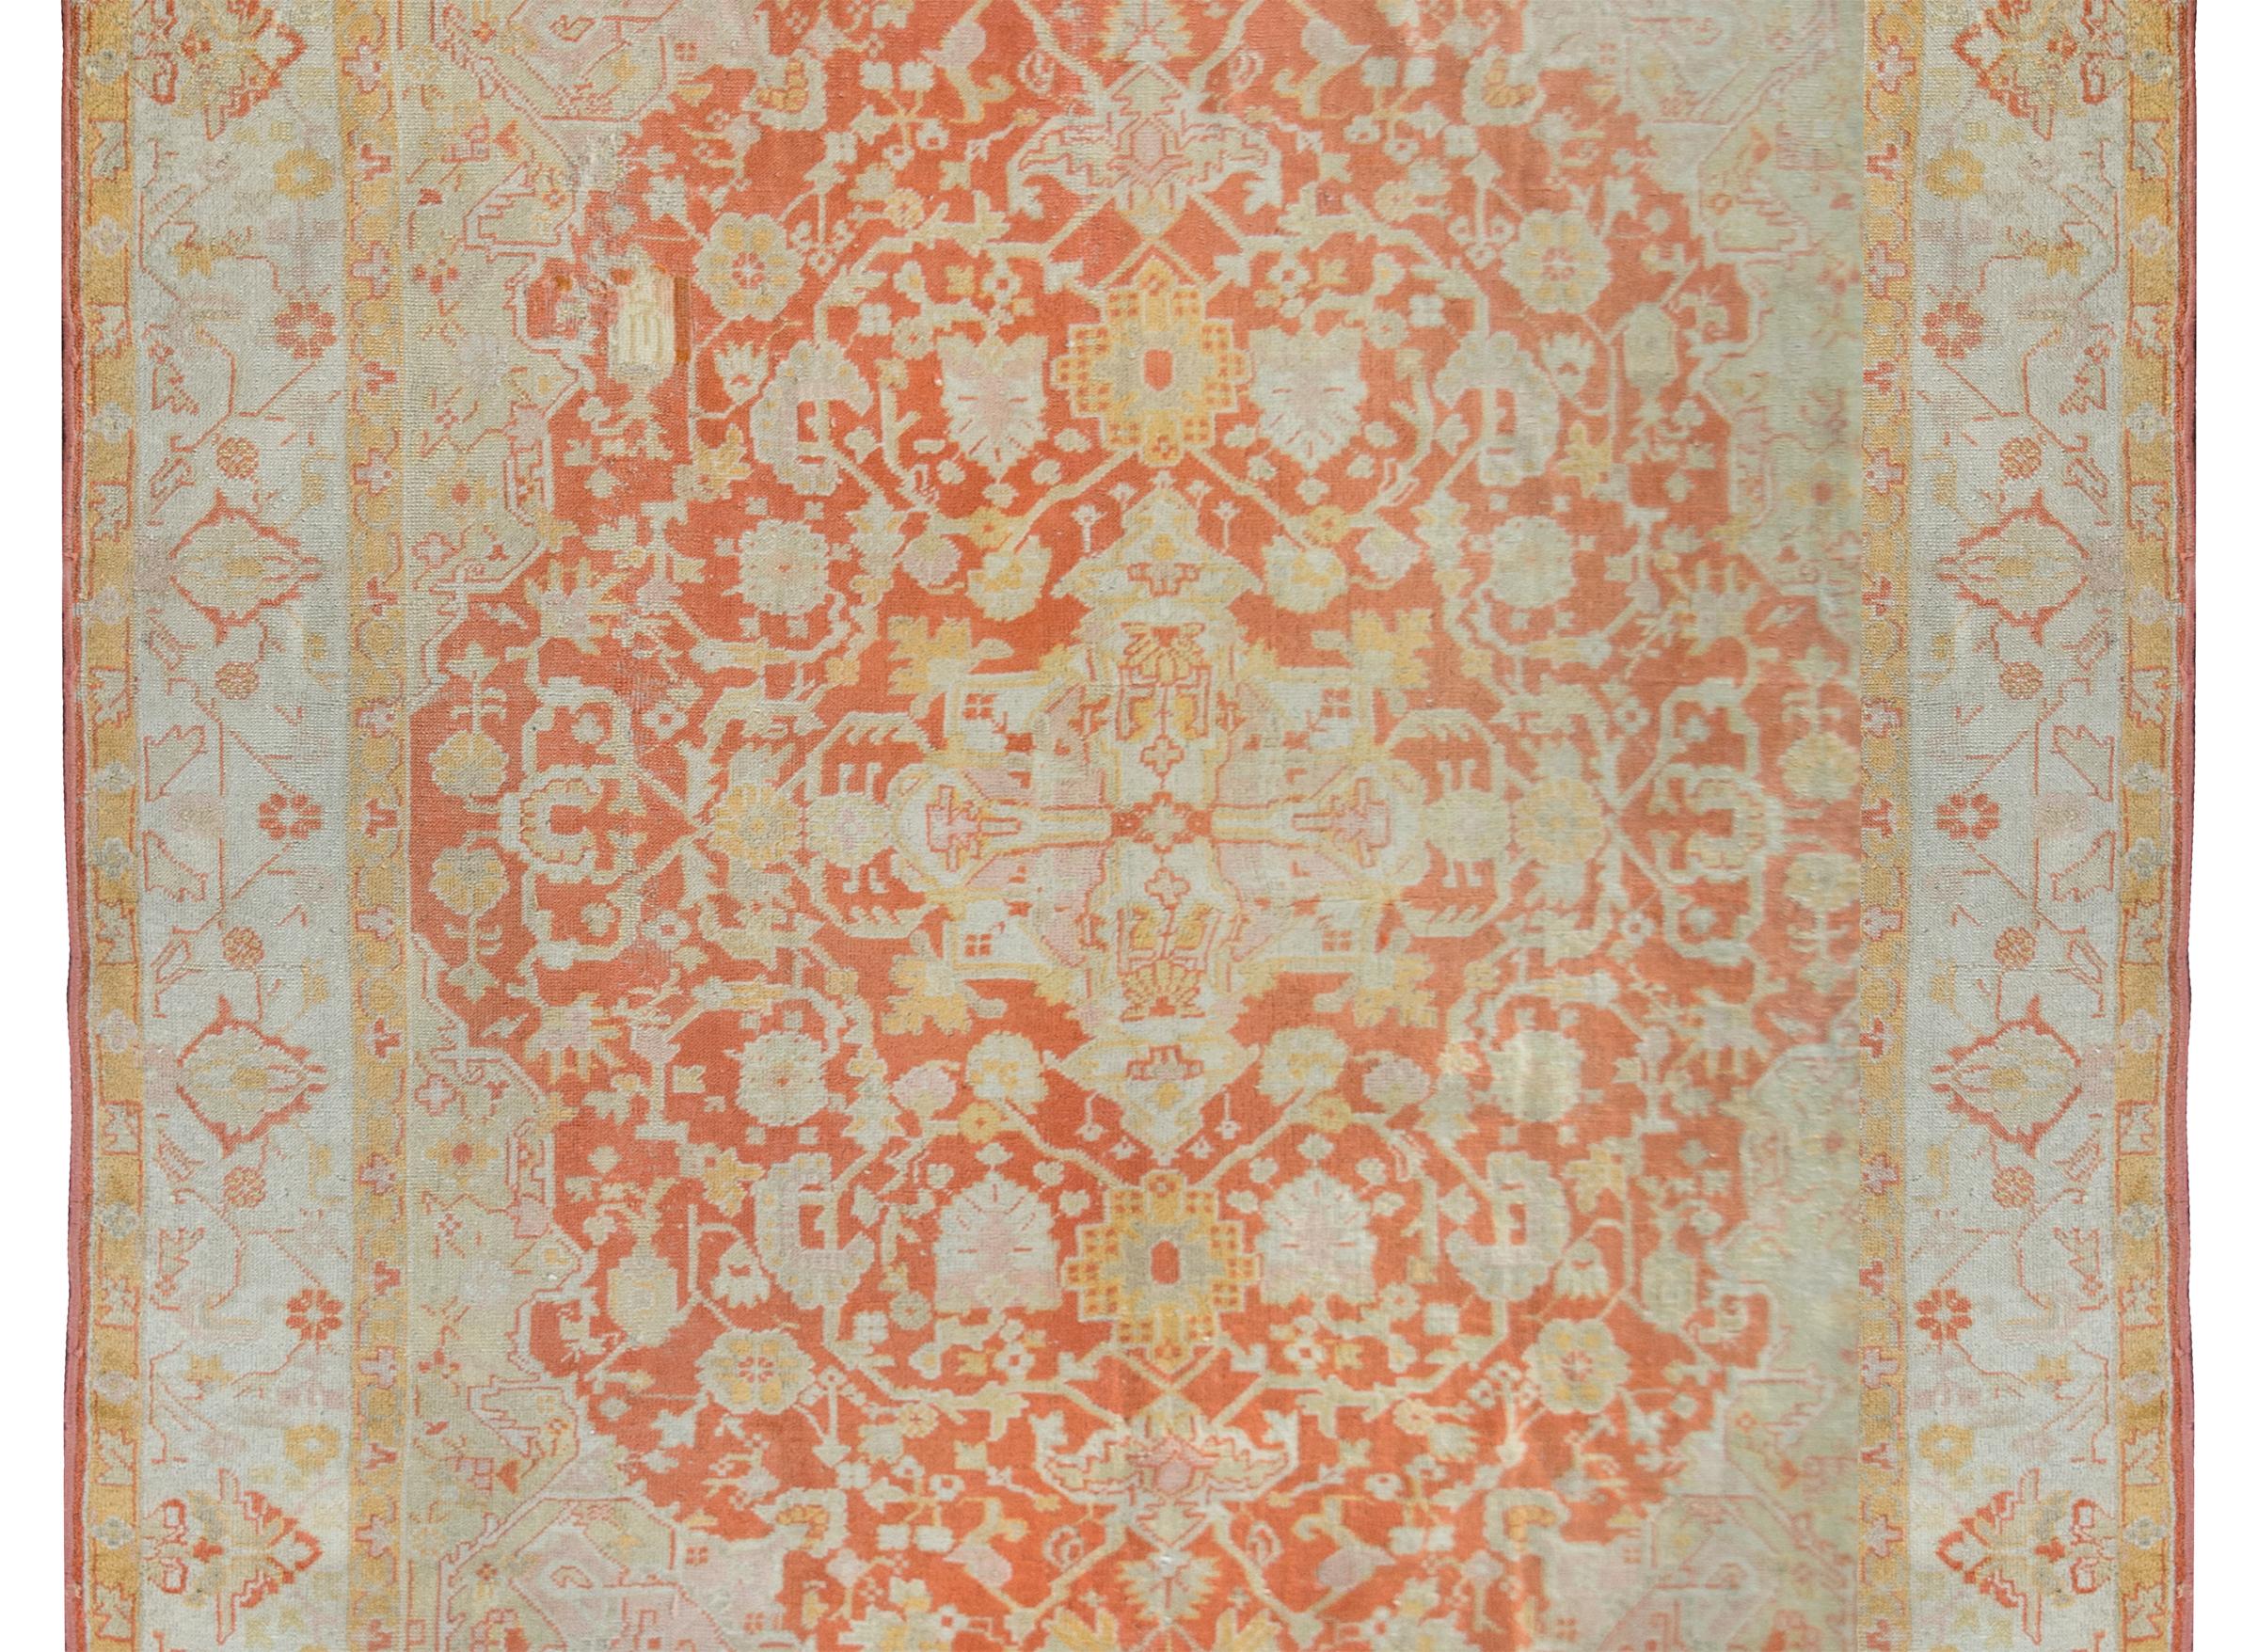 A stunning late 19th century Turkish Oushak rug with a large floral and scrolling vine medallion living amidst a field of more vines and flowers, surrounded by a wide border containing a large central floral patterned stripe flanked by pairs of